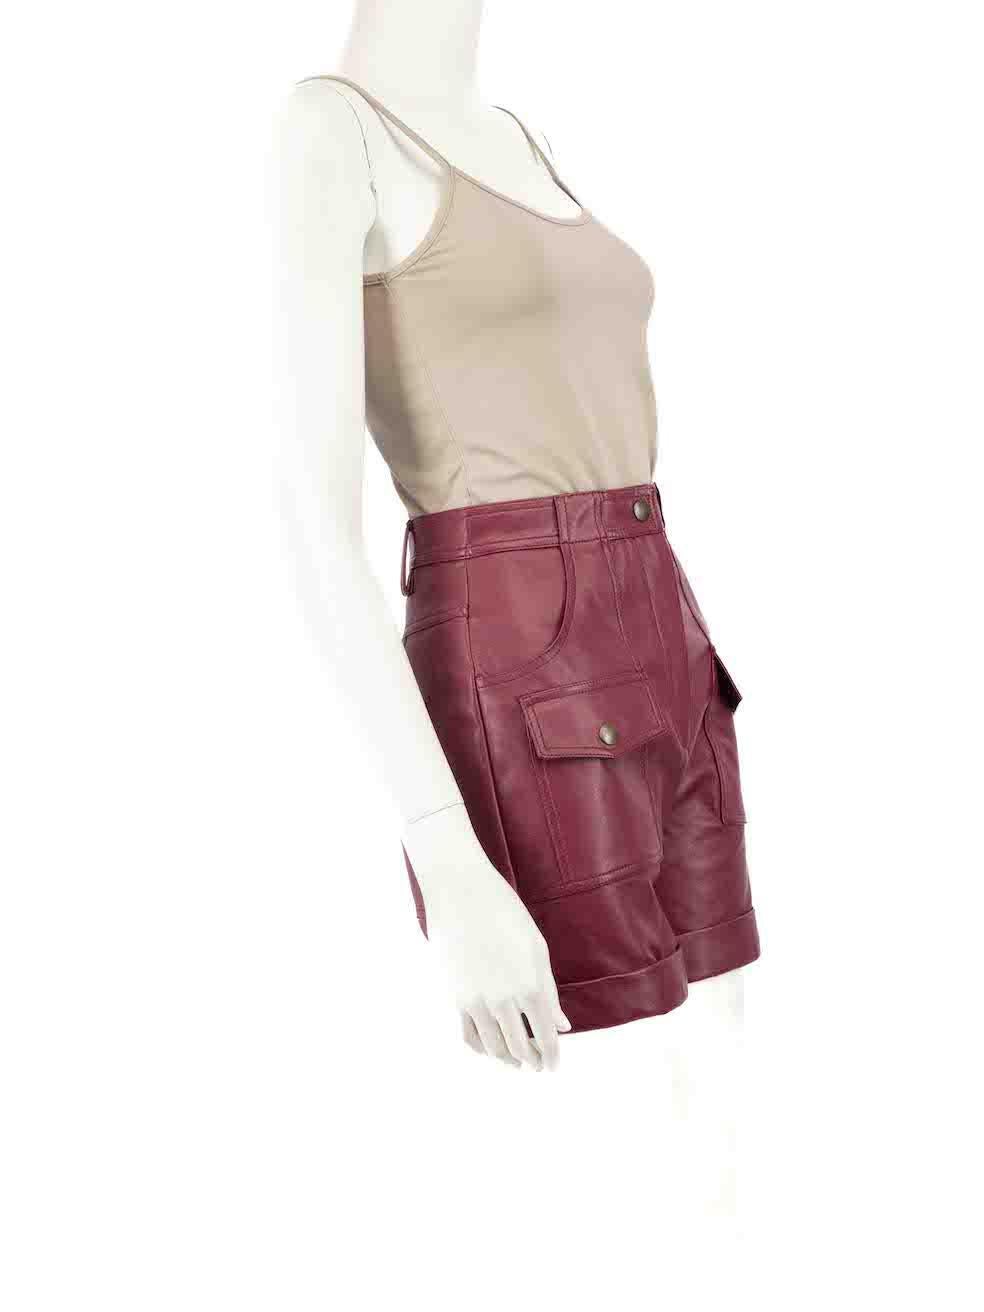 CONDITION is Never worn, with tags. No visible wear to shorts is evident on this new Philosophy di Lorenzo Serafini designer resale item.
 
 
 
 Details
 
 
 Burgundy
 
 Vegan leather
 
 Shorts
 
 2x Front pockets
 
 2x Back pockets
 
 High rise
 
